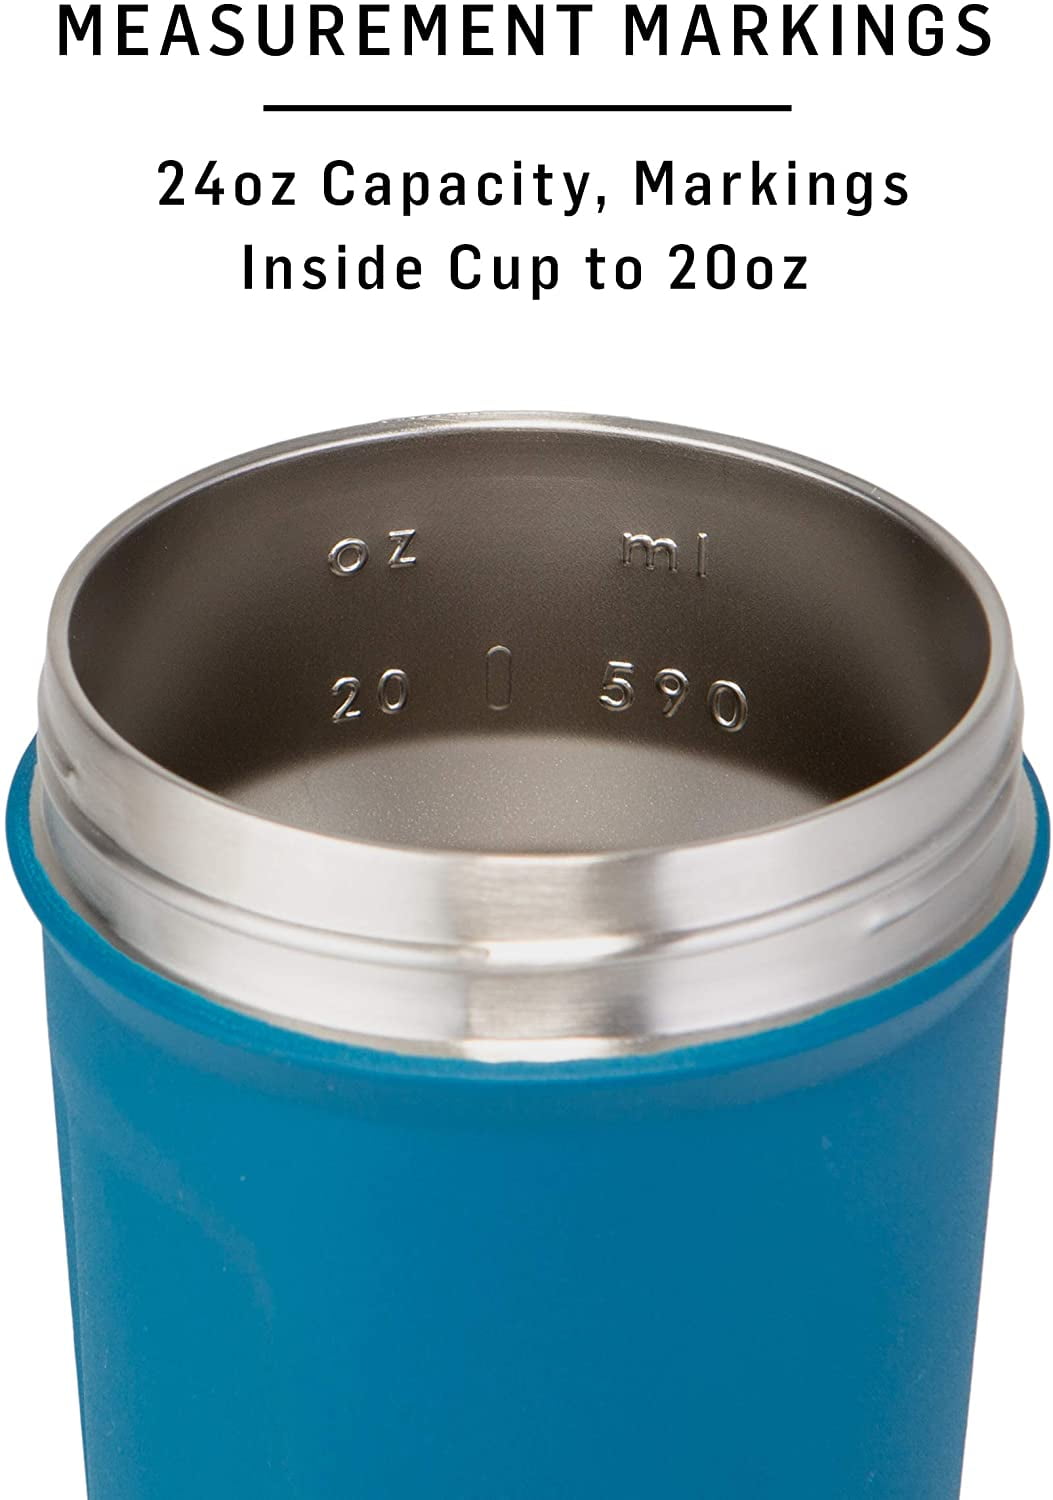 Promotional 24 oz Endurance Protein Tumbler with Mixing Ball $3.48